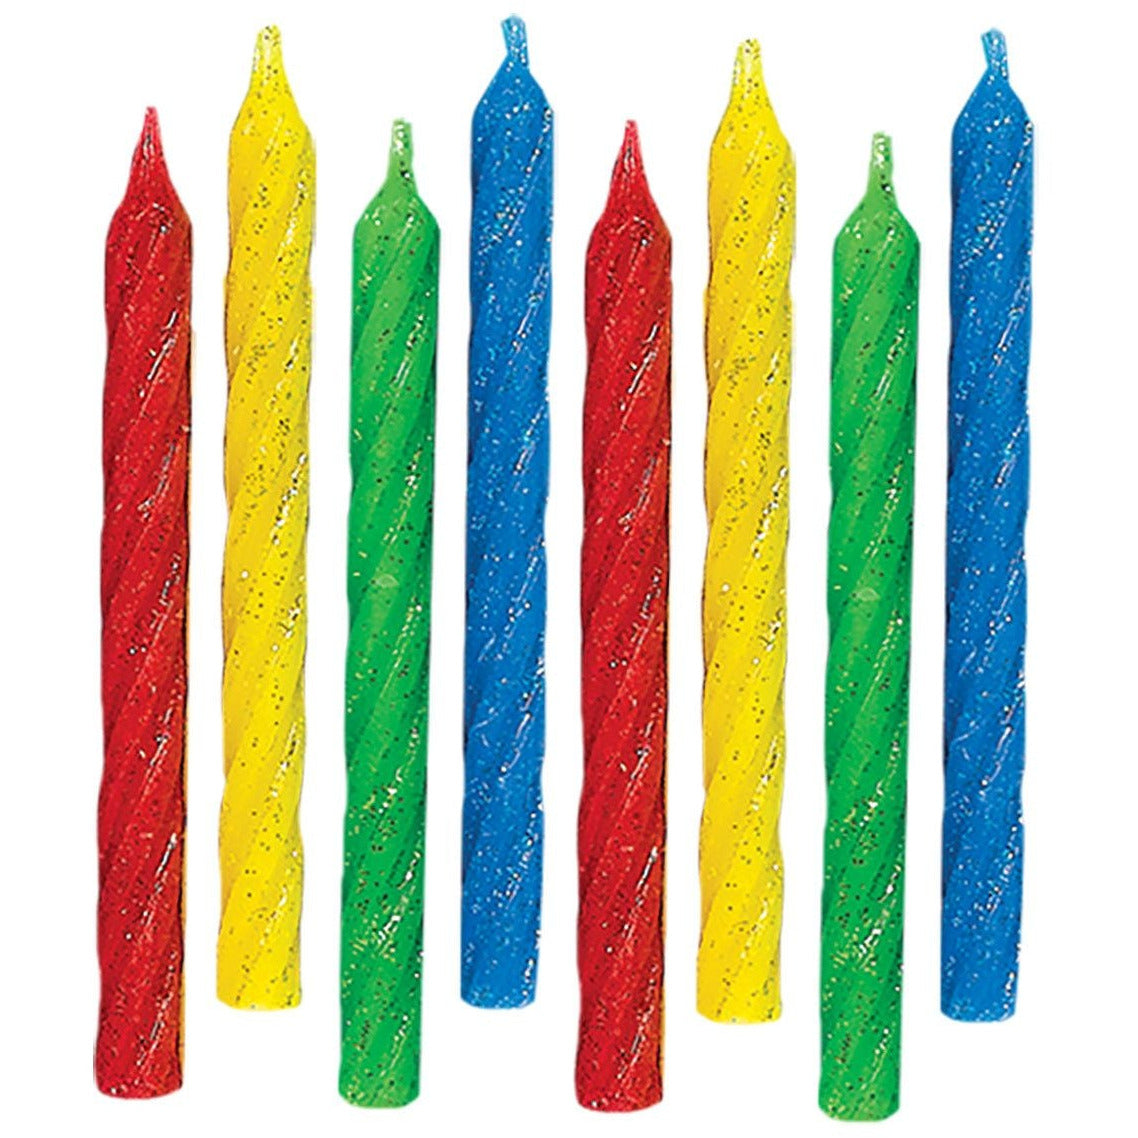 Amscan CANDLES Large Glitter Spiral Candles - Primary